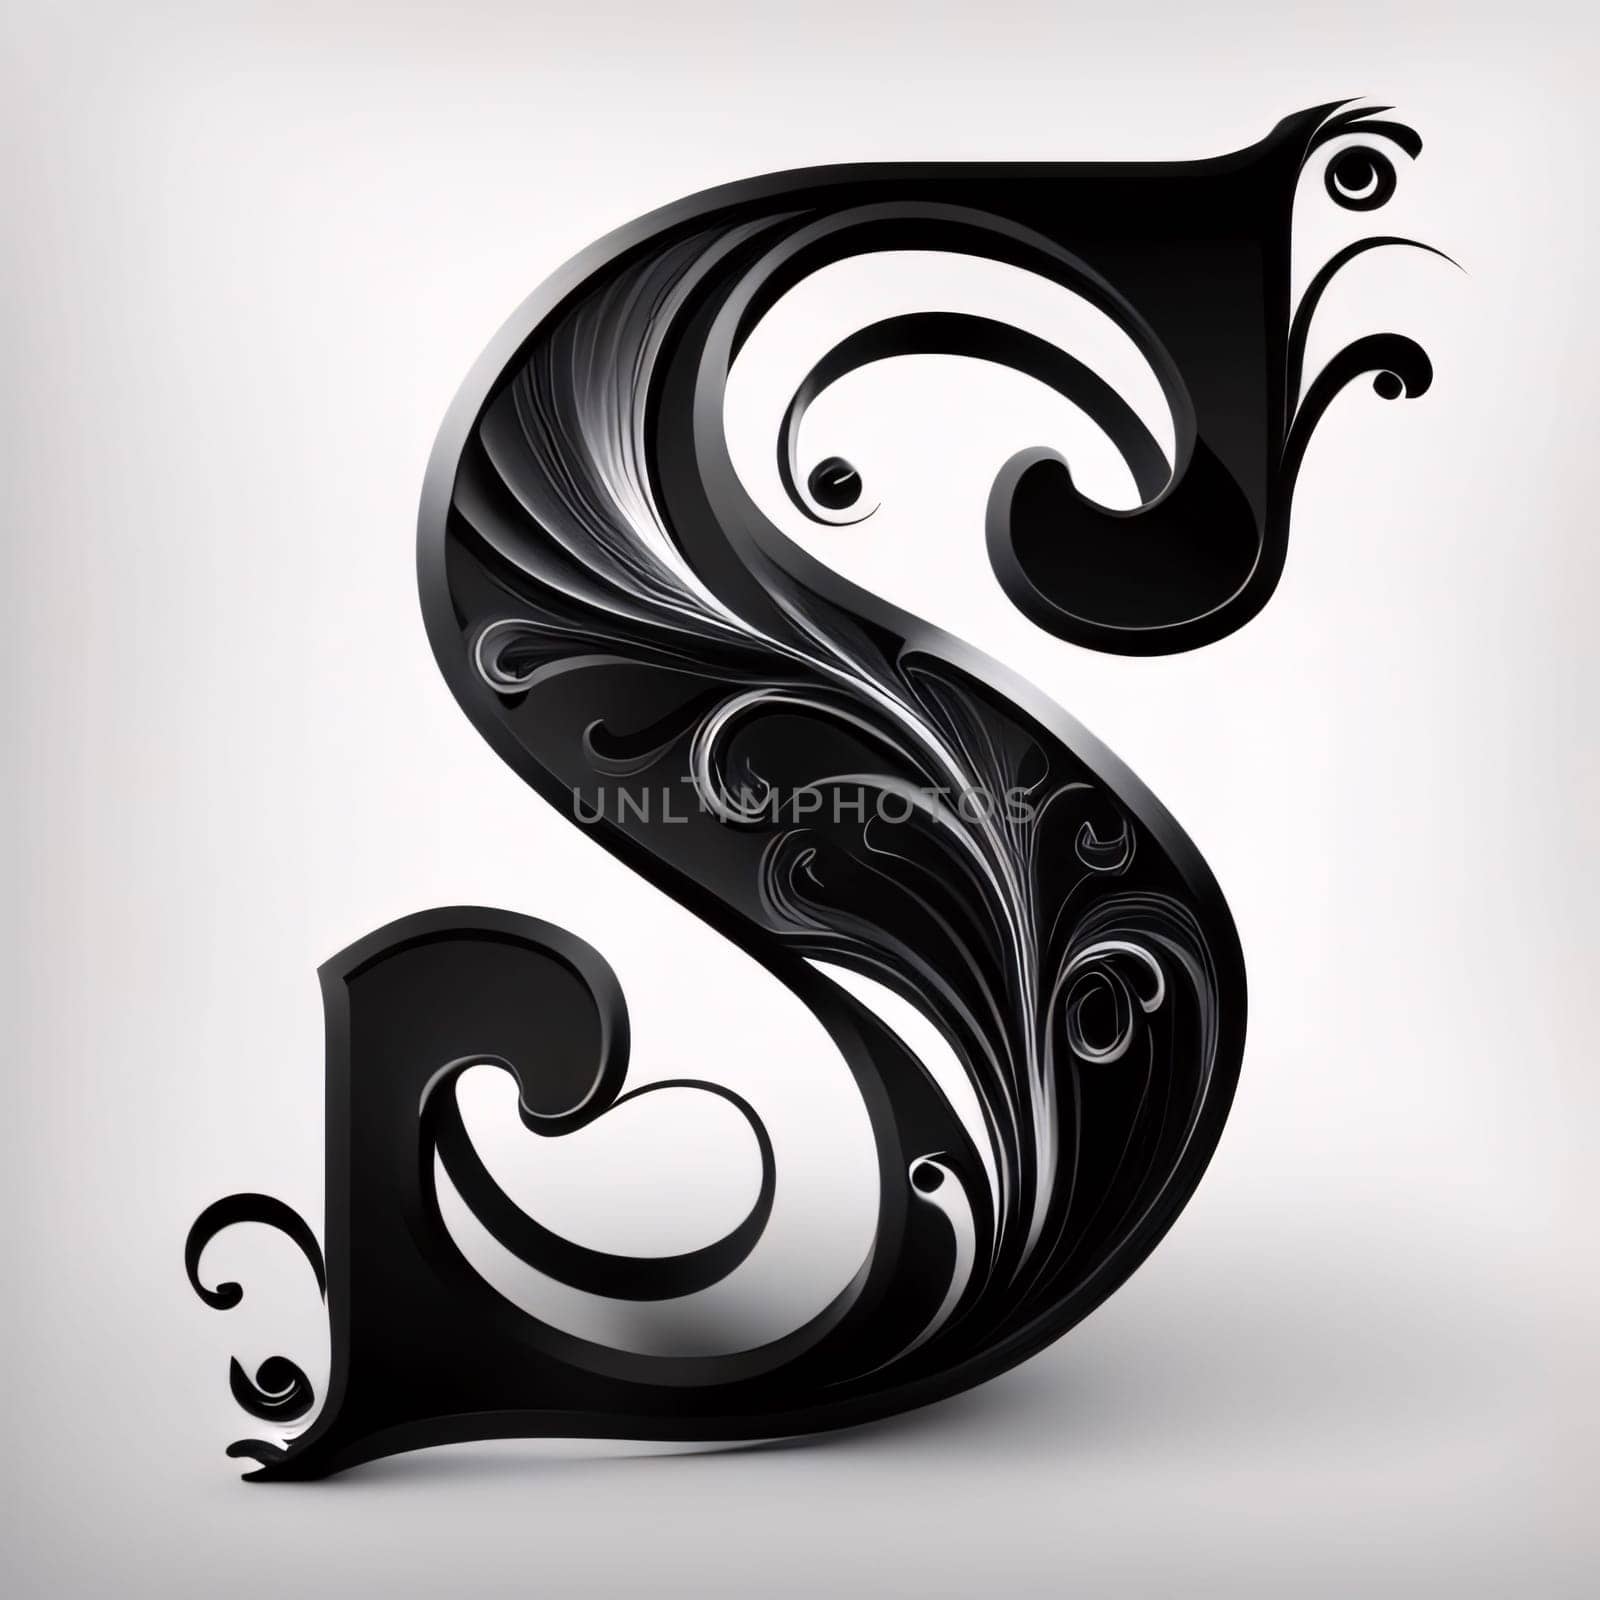 Graphic alphabet letters: decorative letter S with swirls in black and white, vector illustration